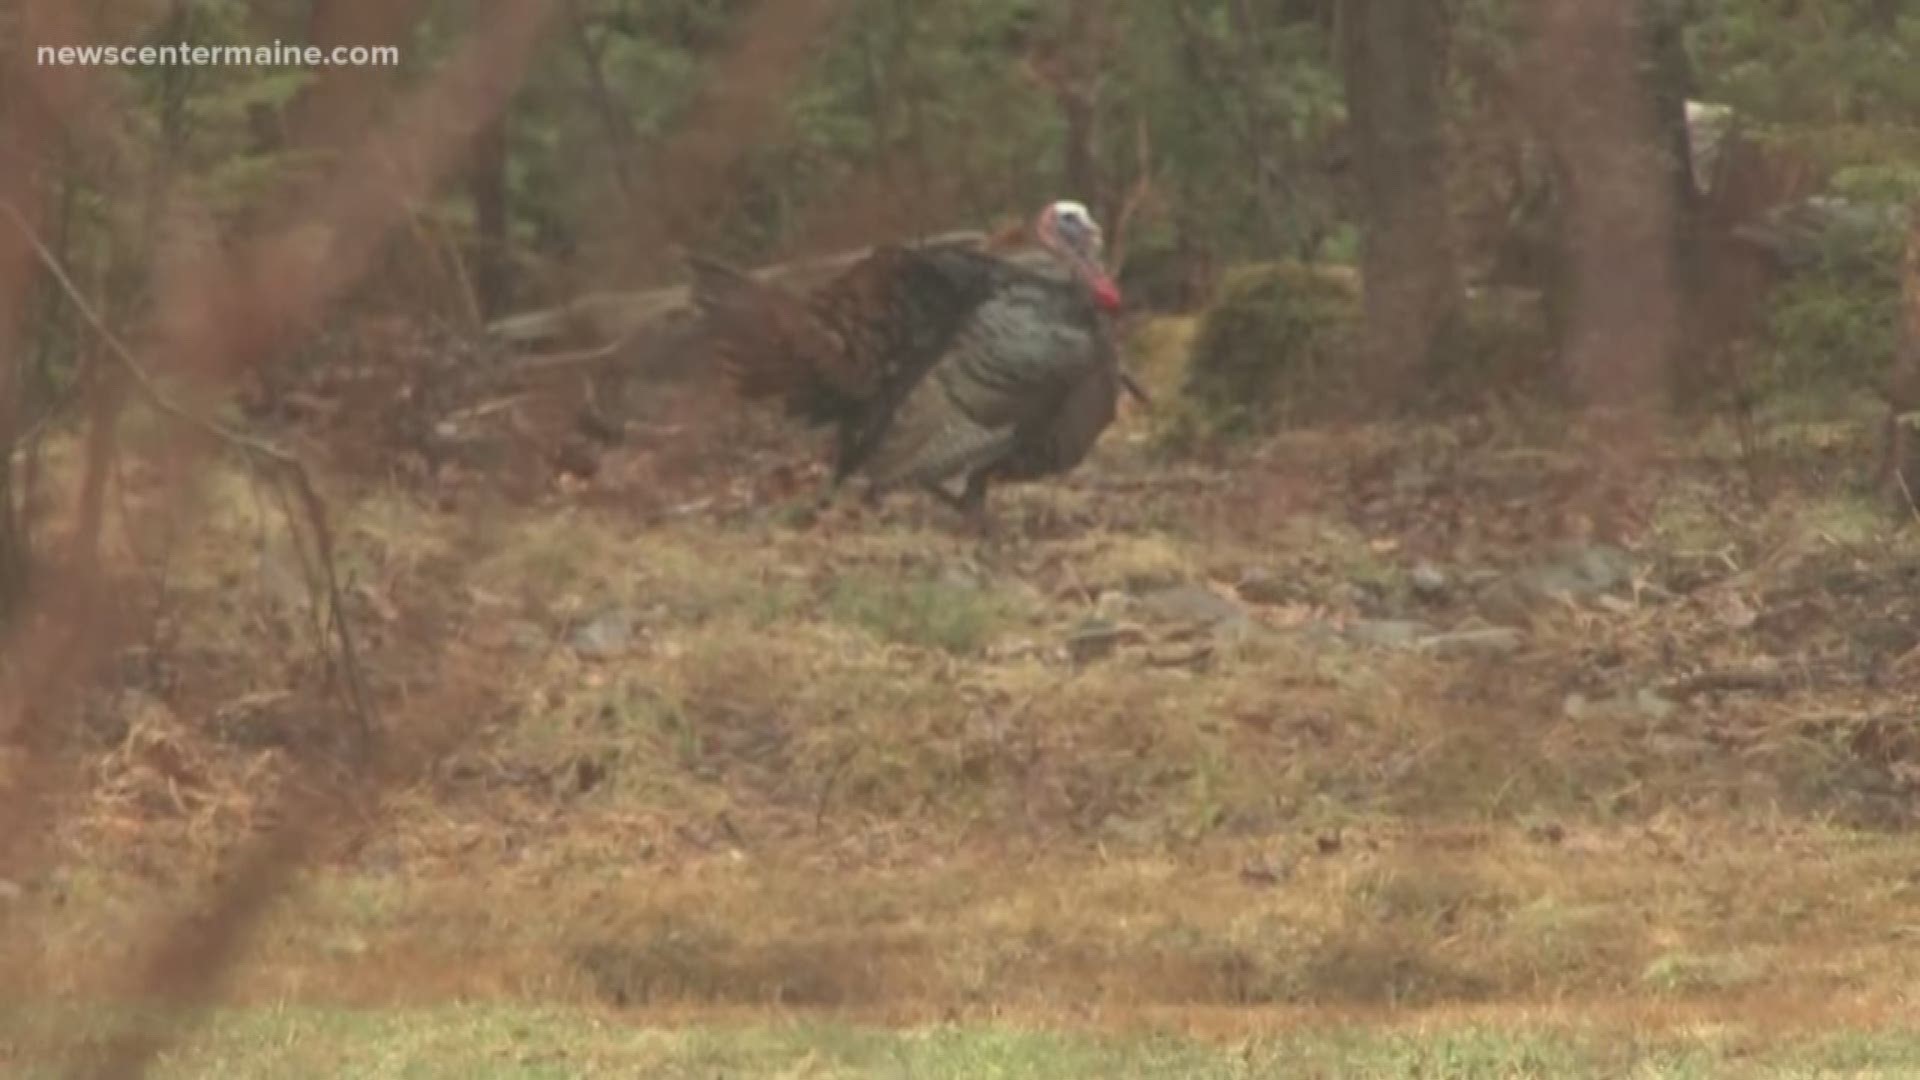 The spring season to bag a bearded turkey opens on April 29th.